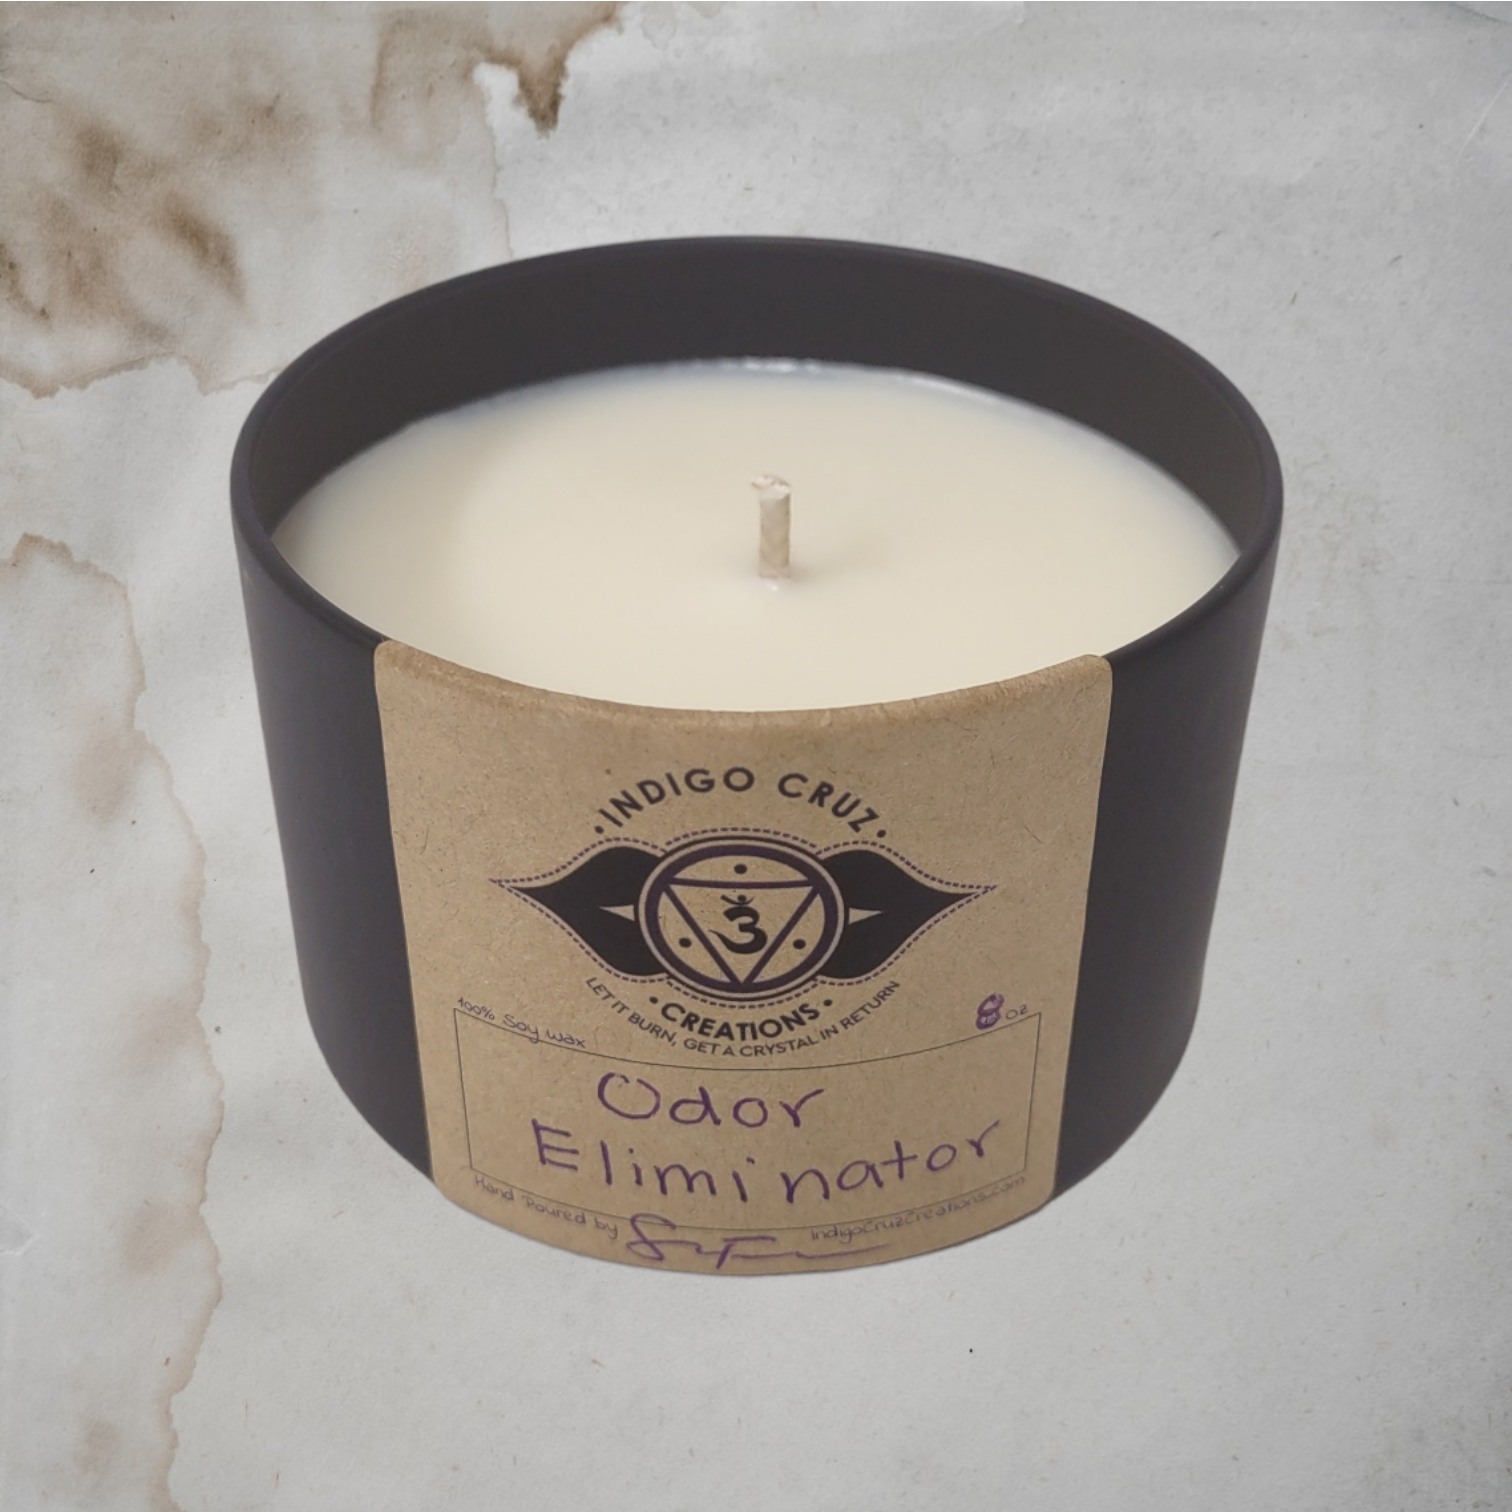 Odor Eliminator 8oz Soy Wax Candle with a crystal at the bottom